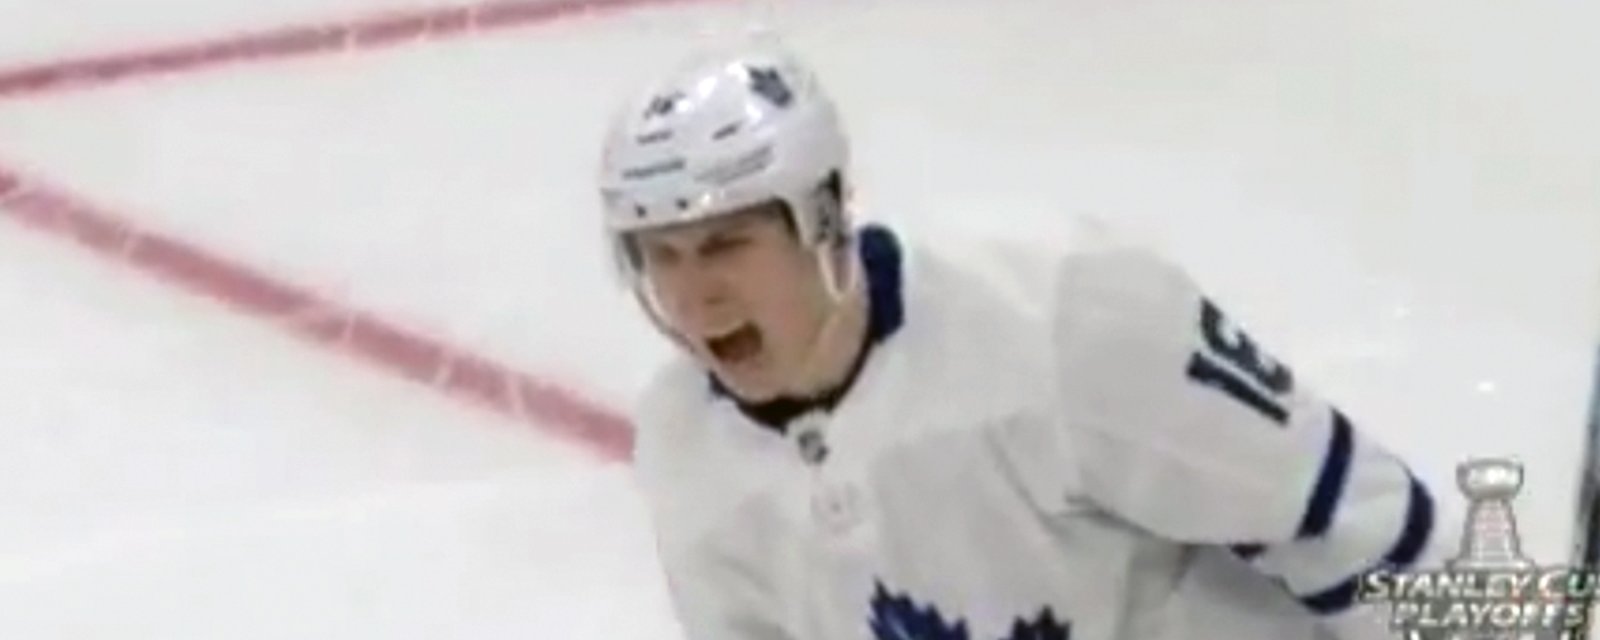 Must See: Marner gets tripped on a shorthanded breakaway, then scores on the penalty shot